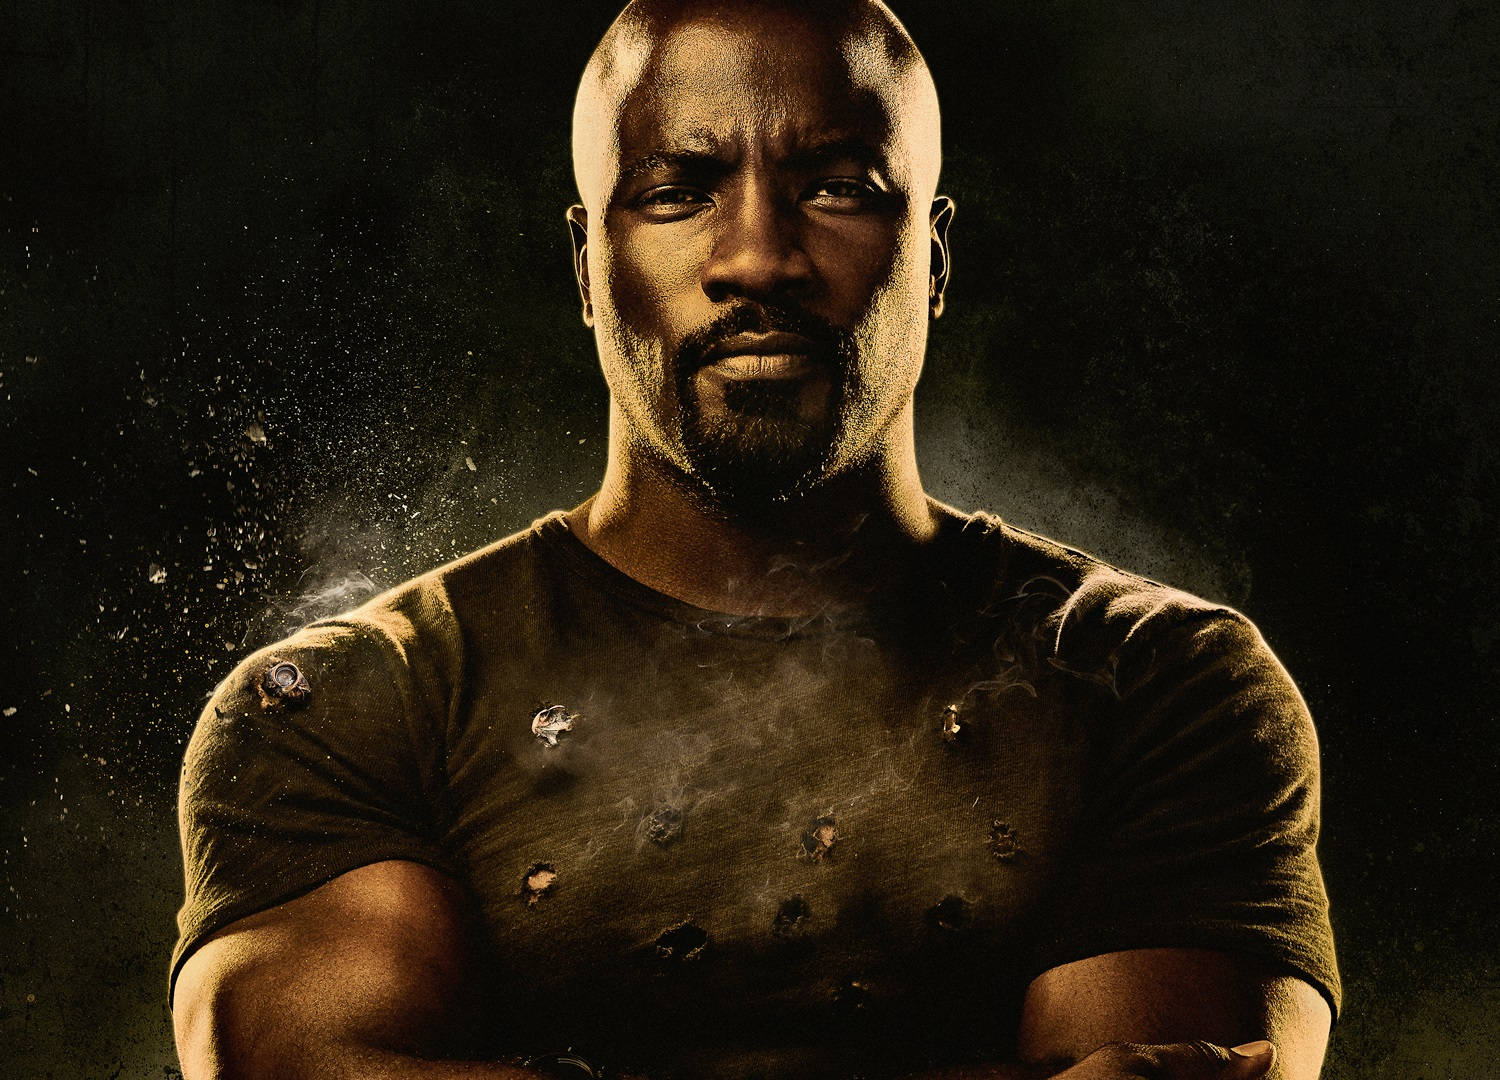 Skådespelarenmike Colter Som Luke Cage. (note: The Sentence Itself Doesn't Have Anything To Do With Computer Or Mobile Wallpaper, But If You Could Provide More Context, I Could Help Translate It In That Way.) Wallpaper